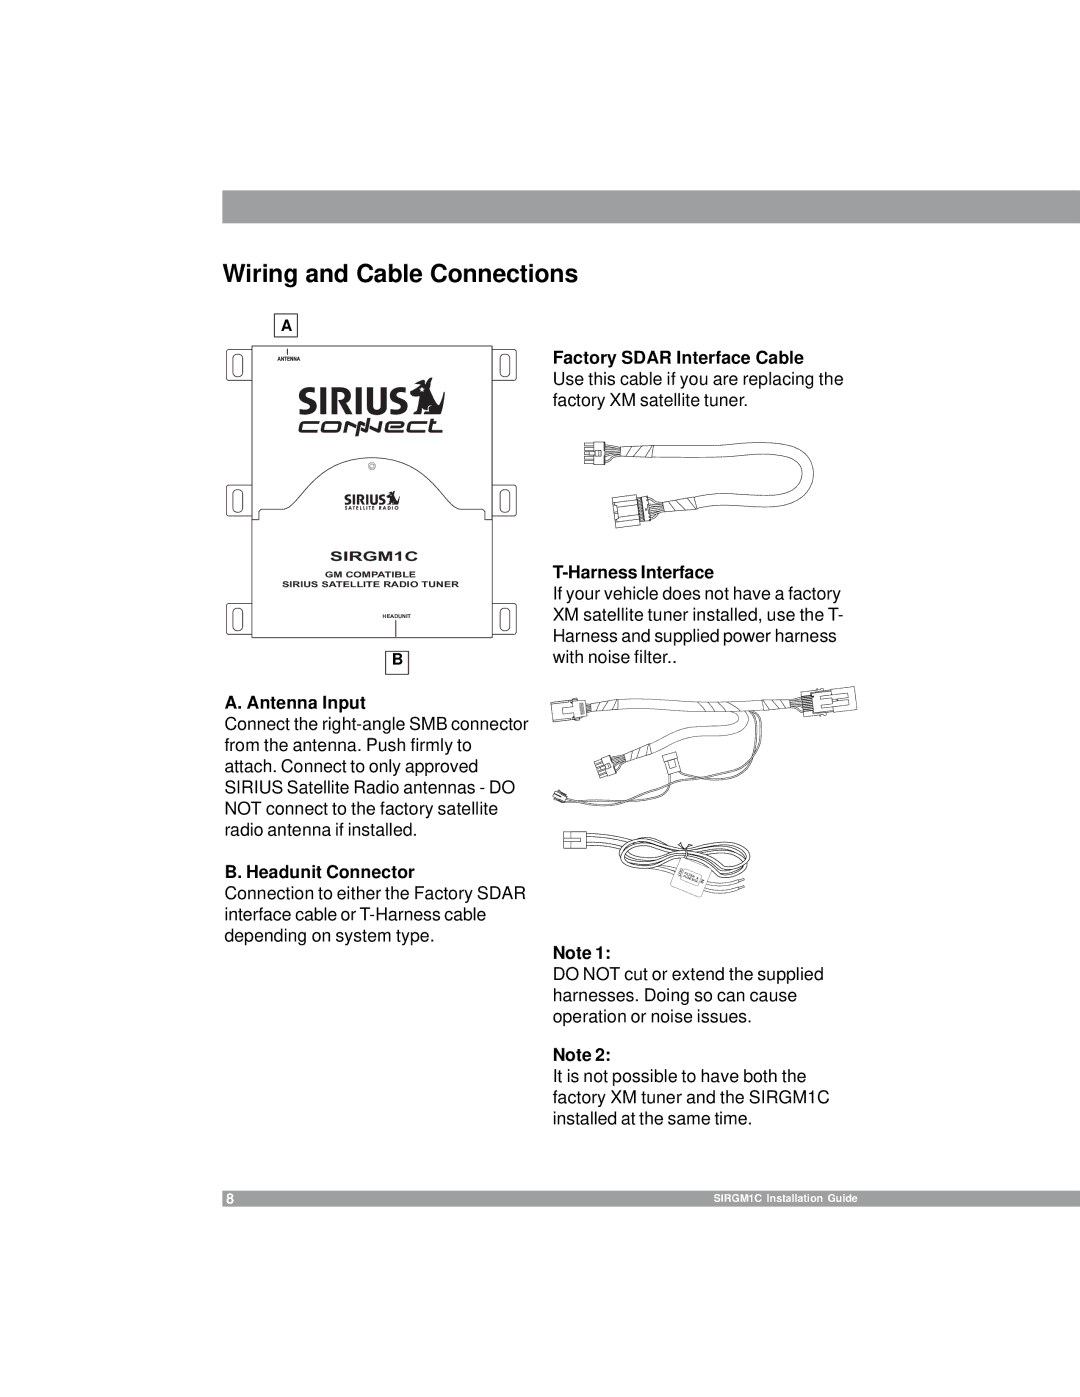 Sirius Satellite Radio 3SIR-GM1 manual Wiring and Cable Connections, Antenna Input, Headunit Connector 